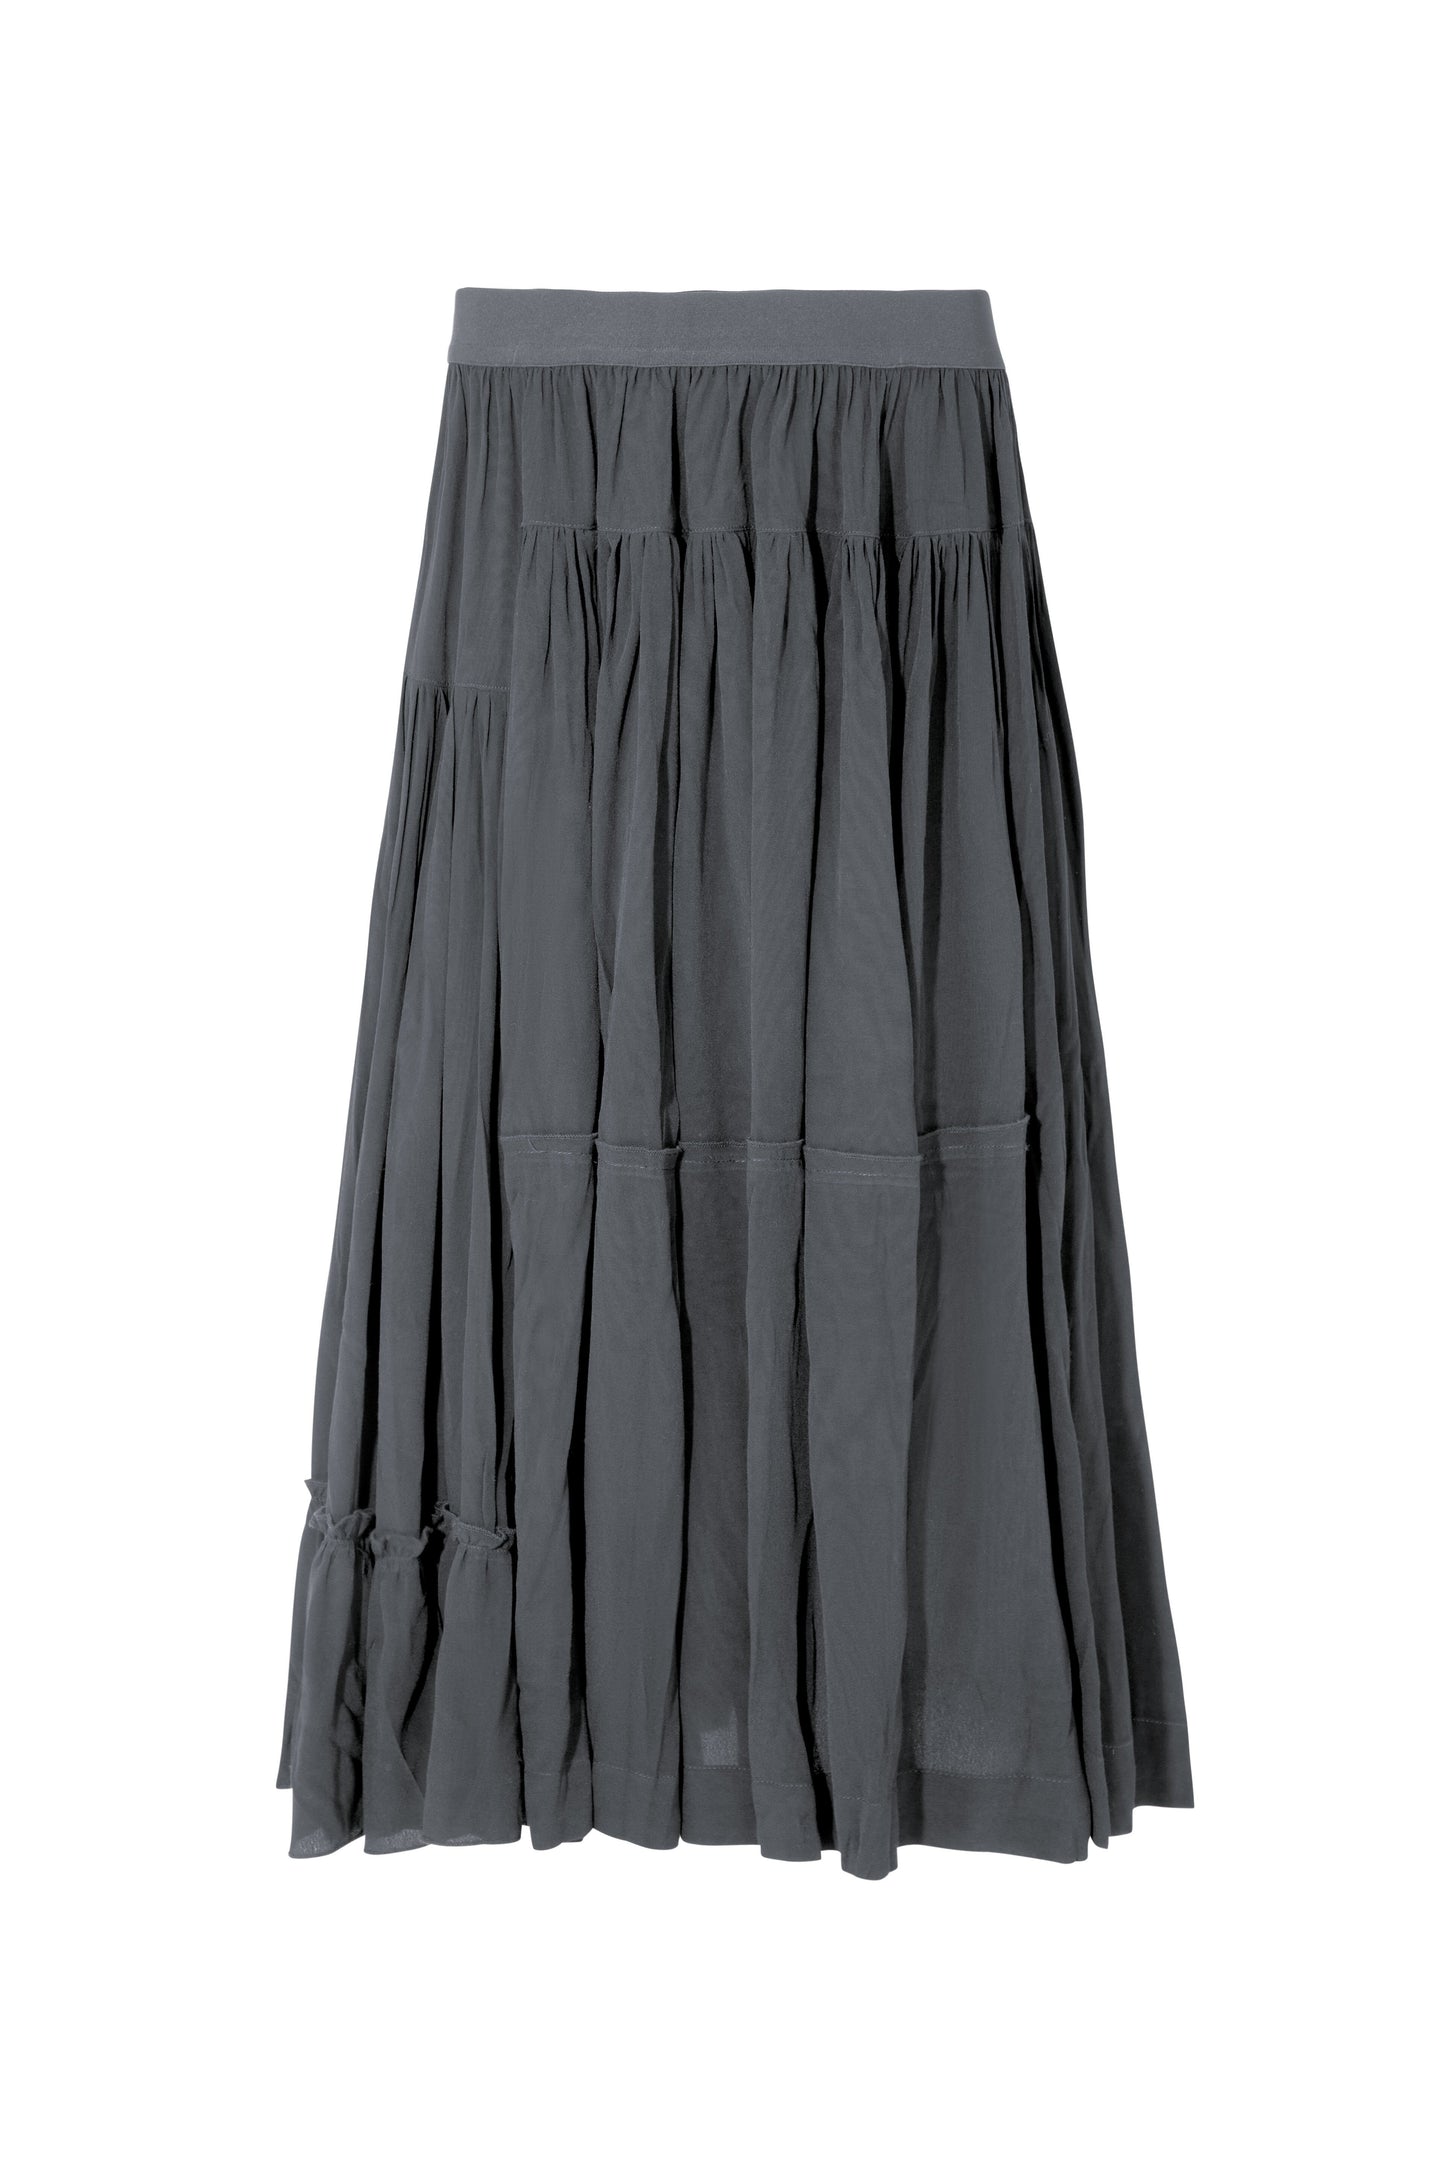 CURATE LITTLE SKIRT TOLD ME SKIRT - STEEL - THE VOGUE STORE